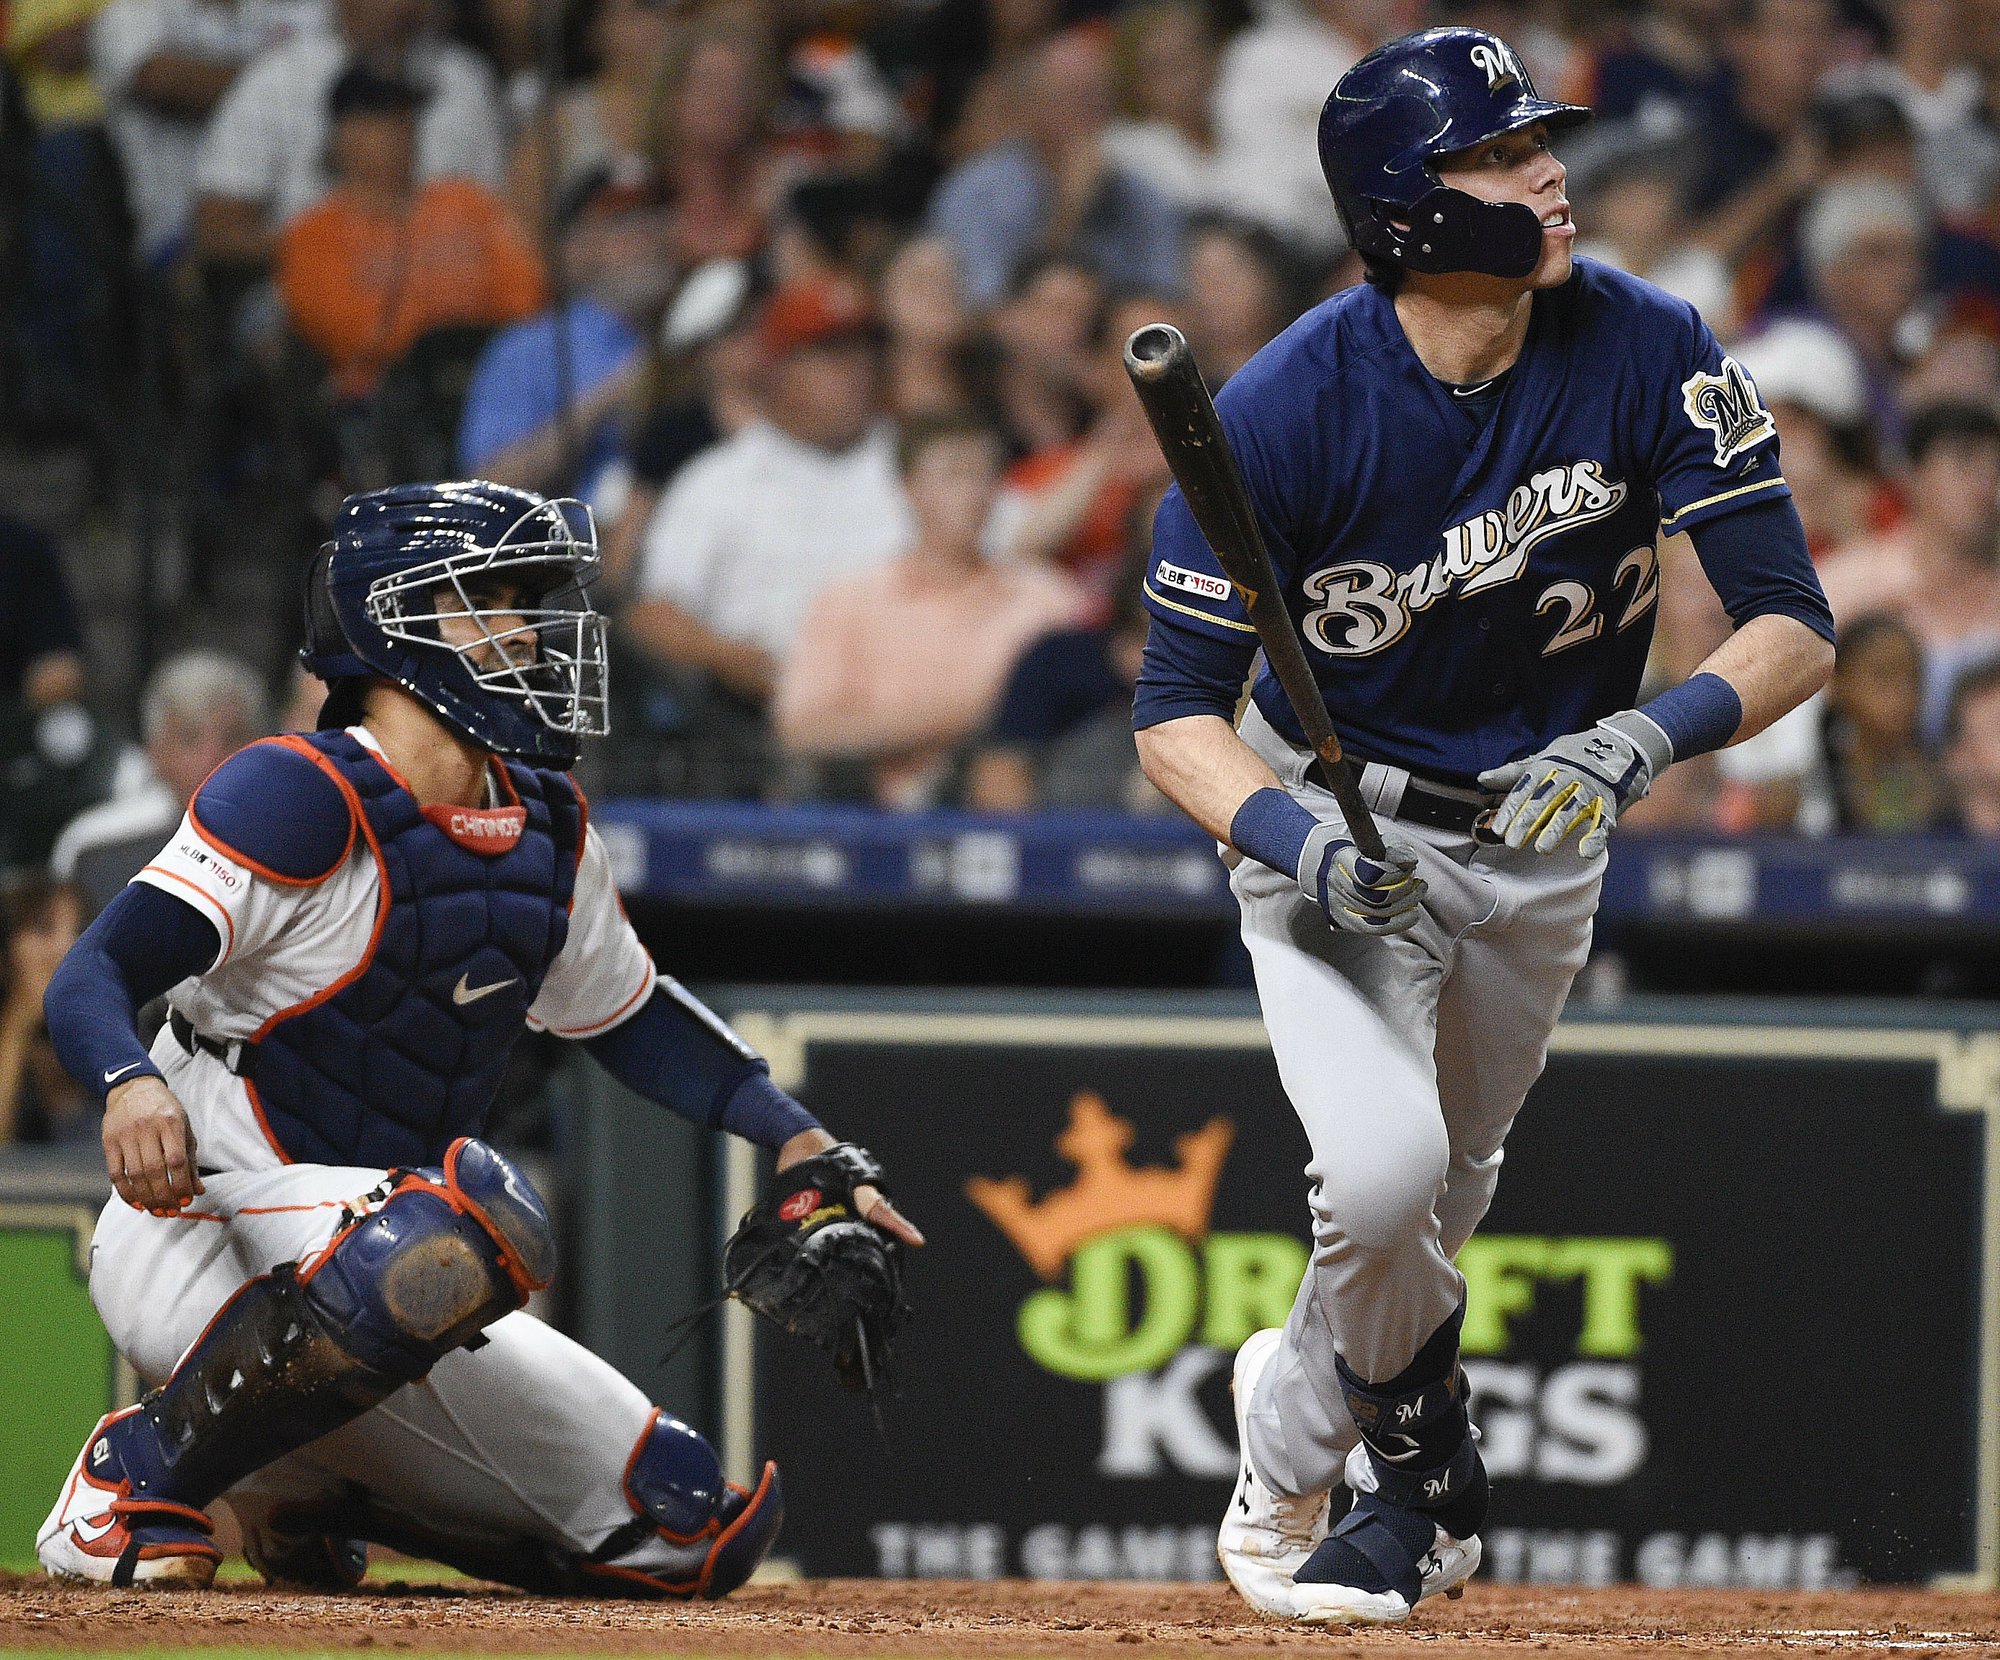 Injured Yelich still in the hunt for batting title